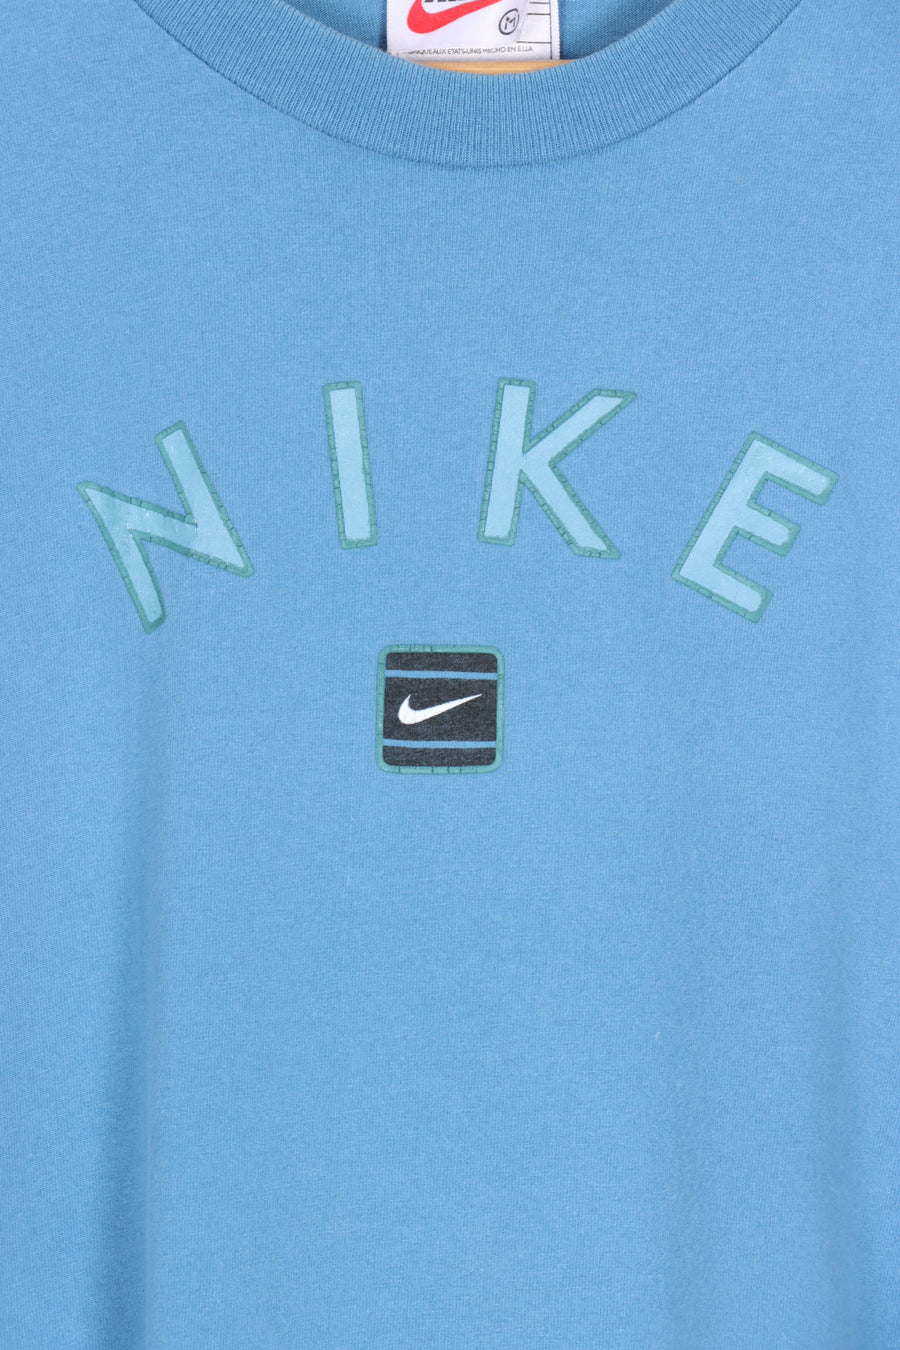 NIKE Blue Swoosh Spell Out T-Shirt (Women's S-M)